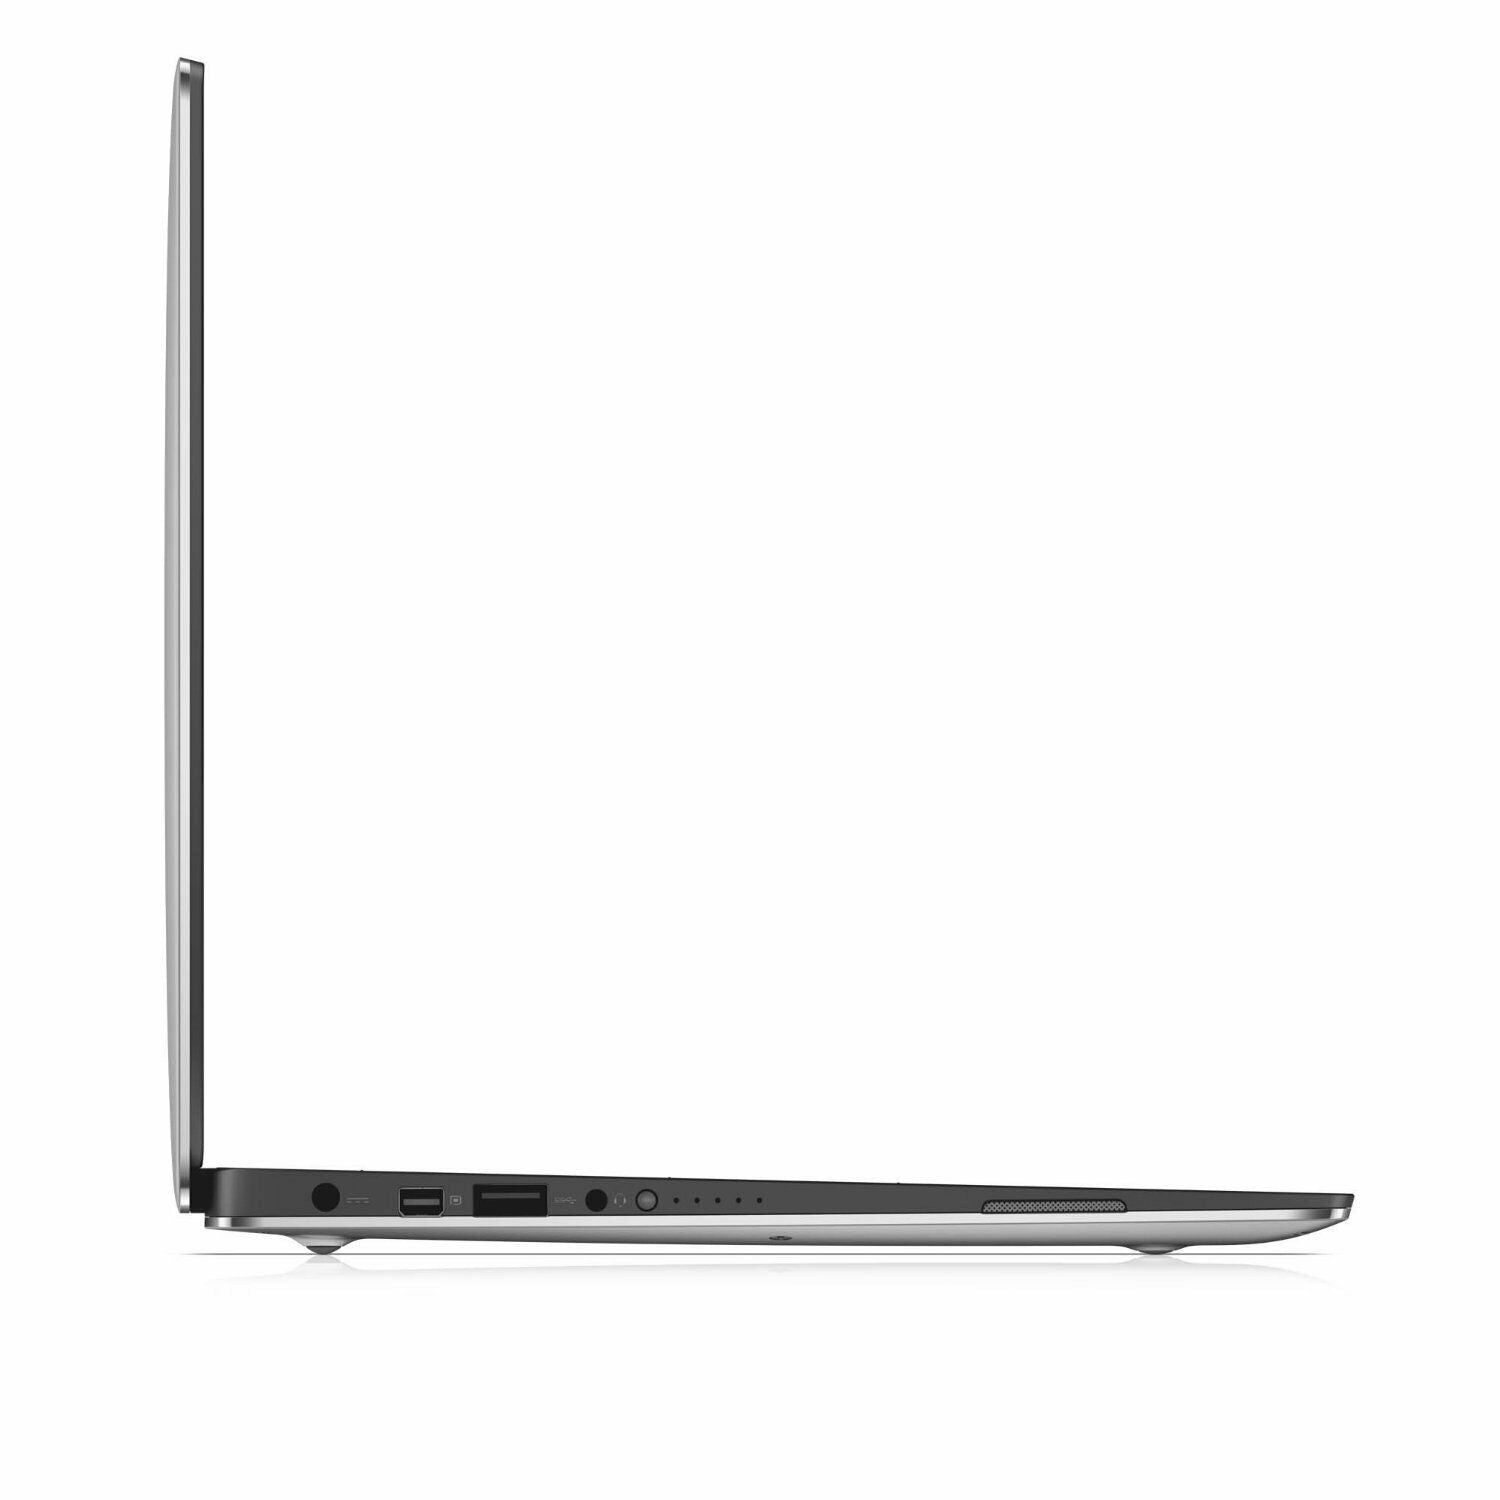 Dell XPS 13" Touch Screen Laptop Core i5-5200U 2.3GHz 8GB RAM 238GB SSD, Silver